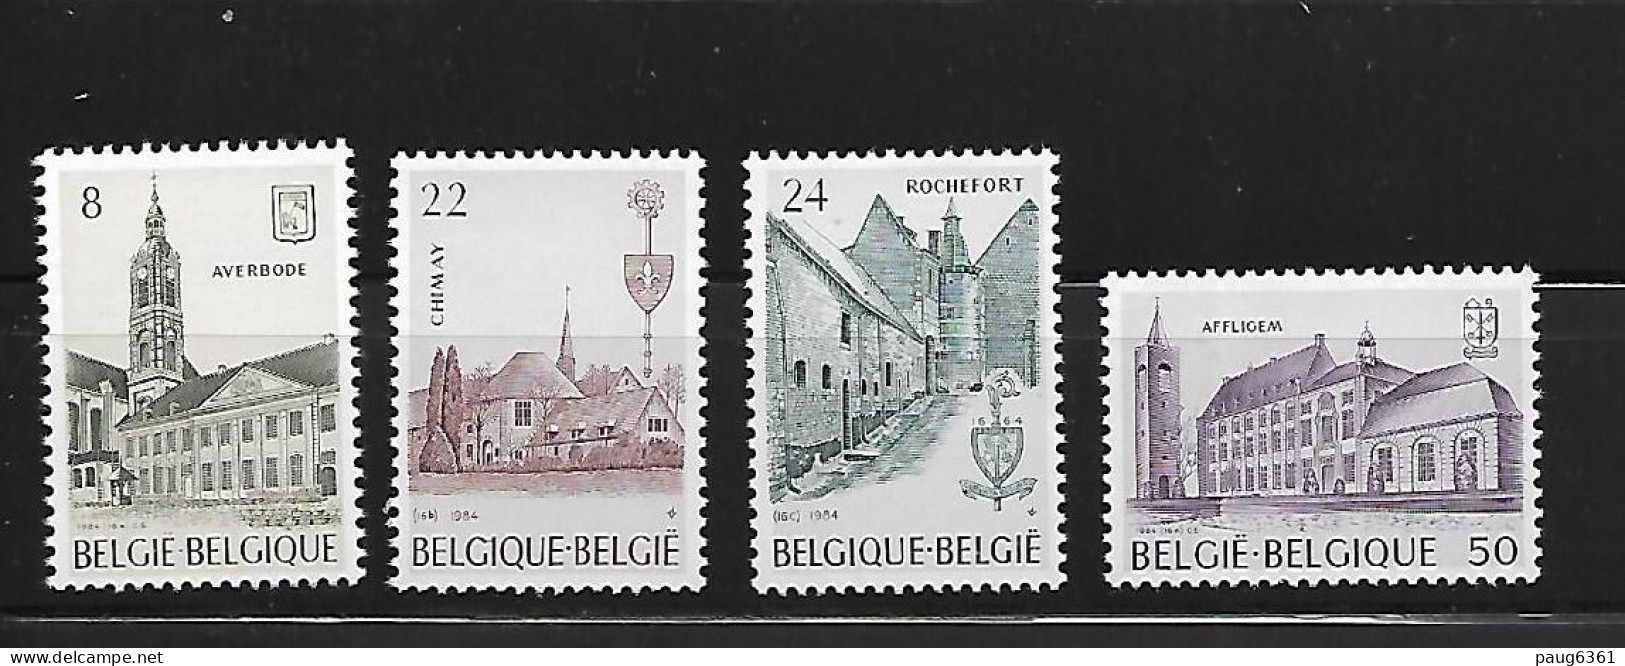 BELGIQUE 1984 ABBAYES  YVERT N°2146/2149  NEUF MNH** - Iglesias Y Catedrales